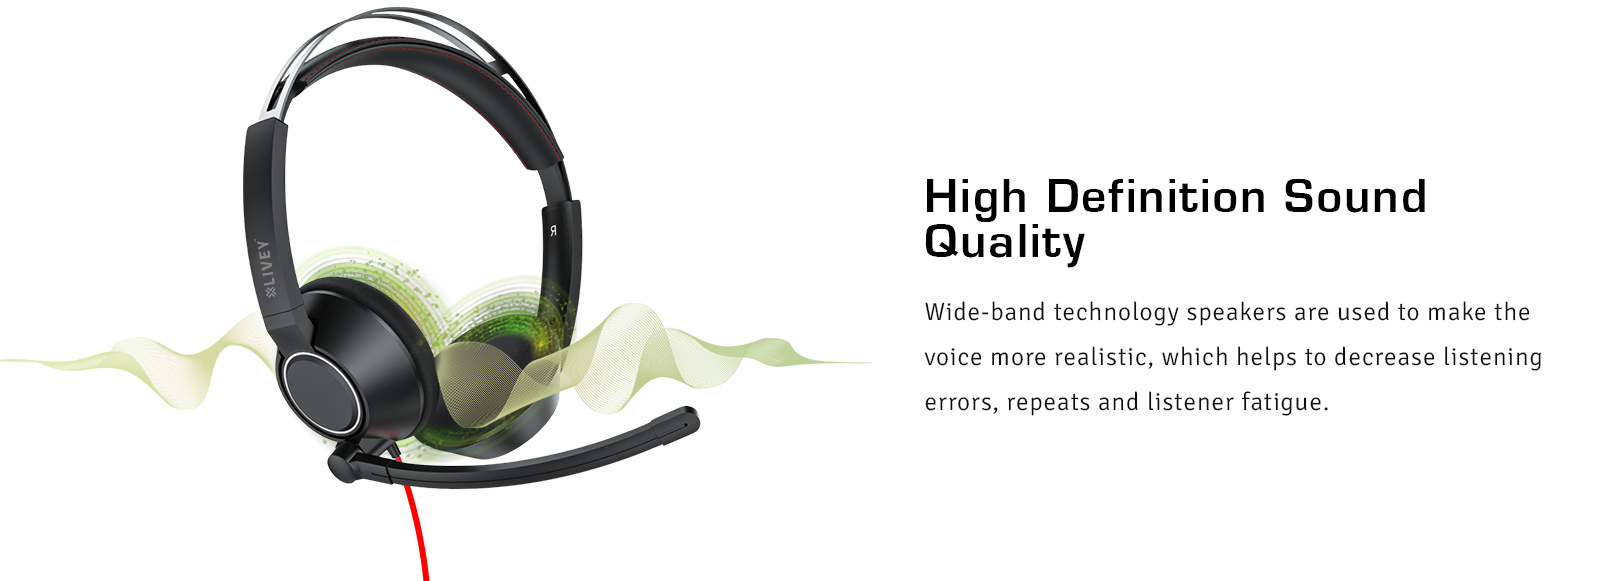 LIVEY 415 Series headset with high definition sound quality